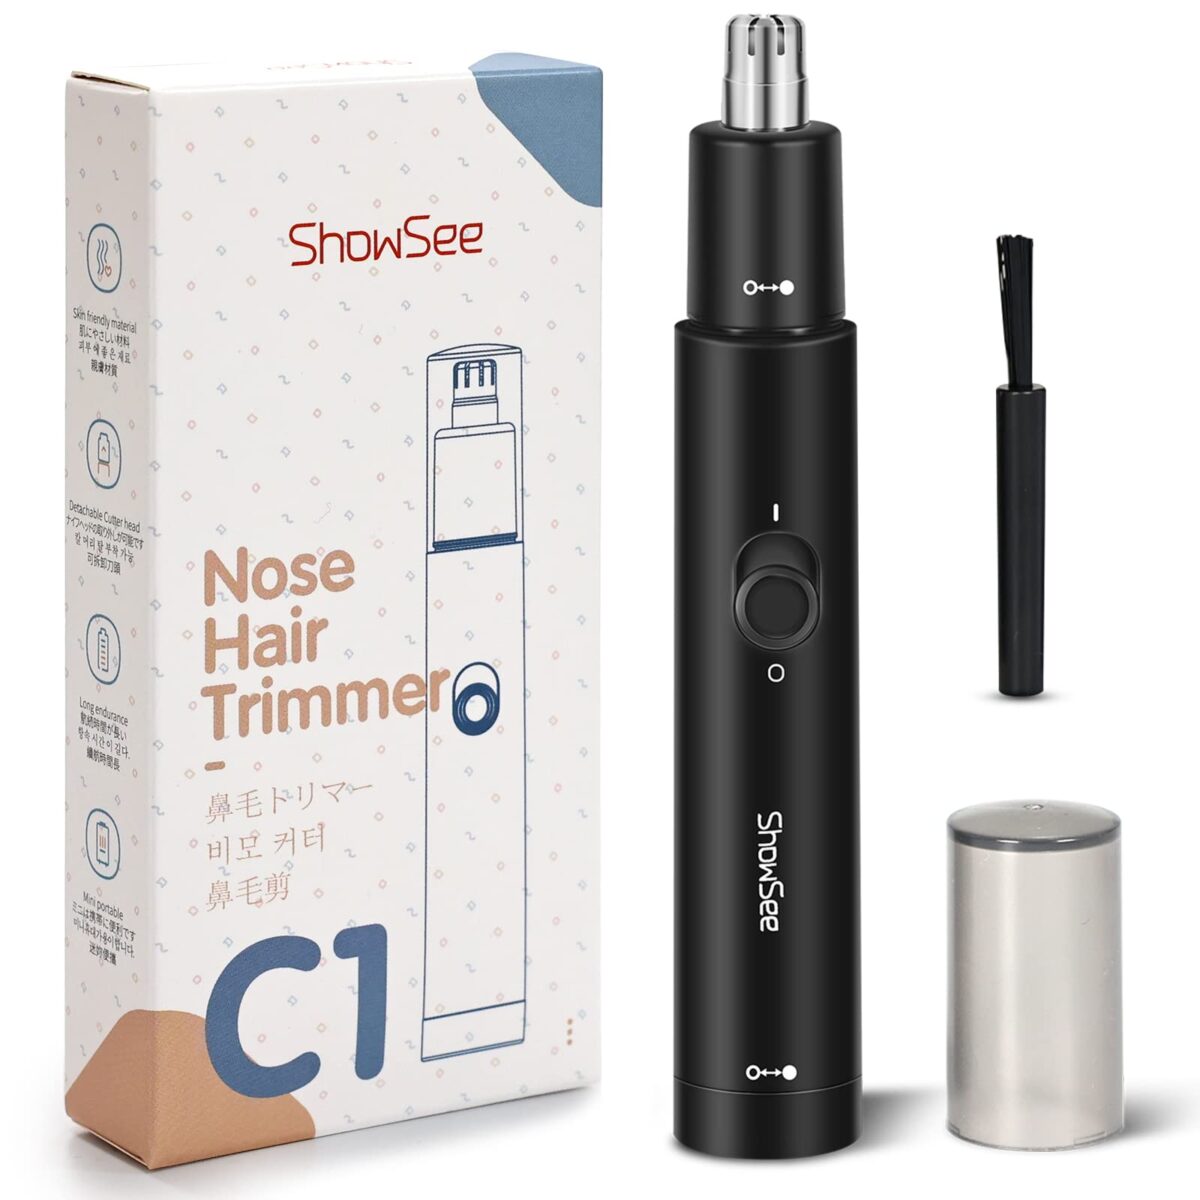 ShowSee C1 Nose Trimmer Precision Grooming Essential